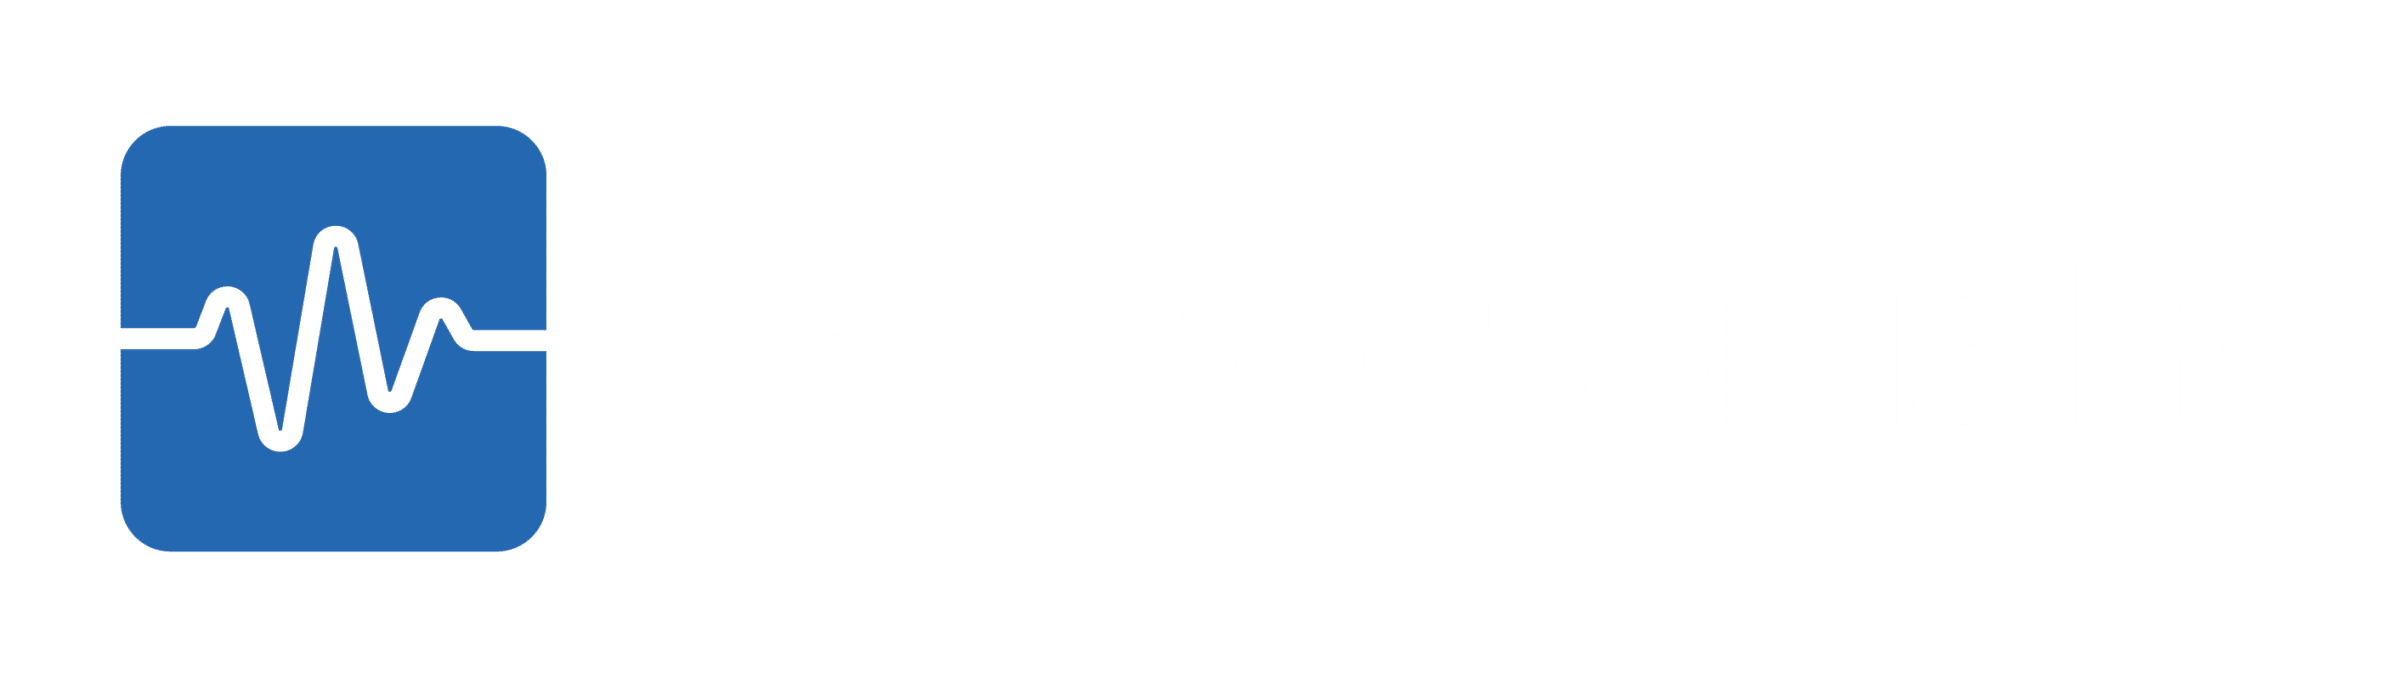 The Doctor is In - Linked In